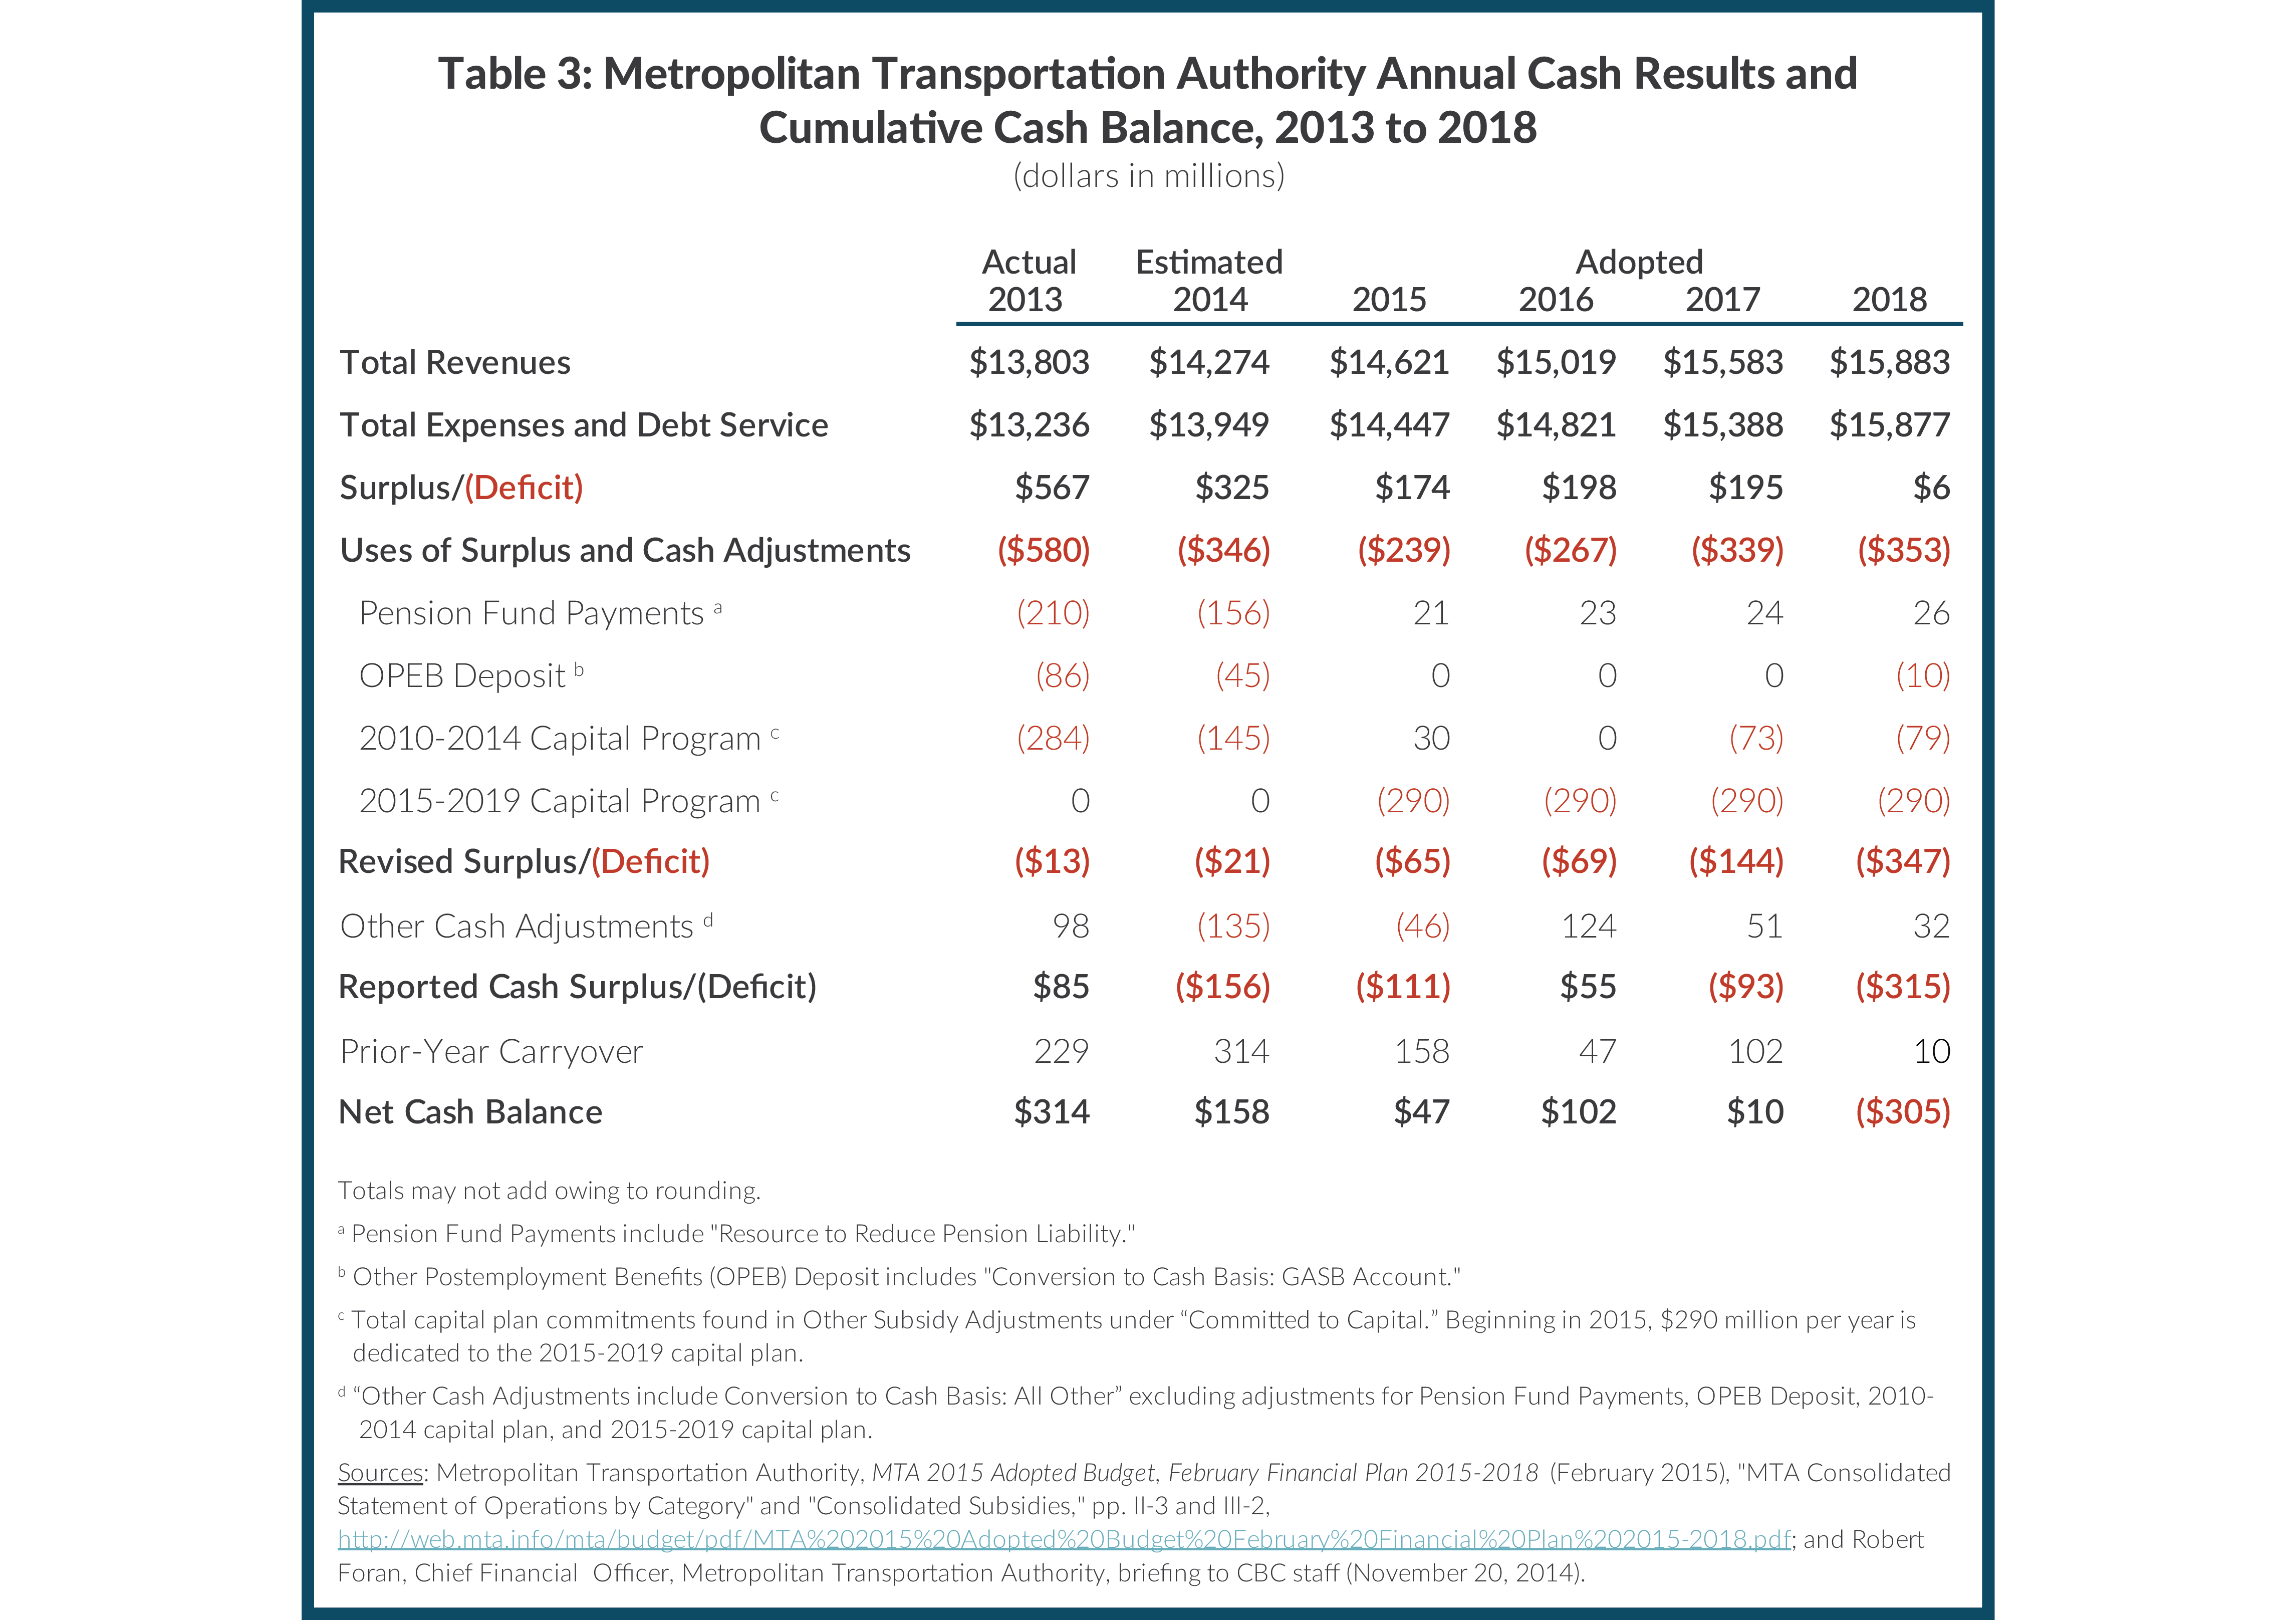 Table 3: Metropolitan Transportation Authority Annual Cash Results and Cumulative Cash Balance, 2013 to 2018